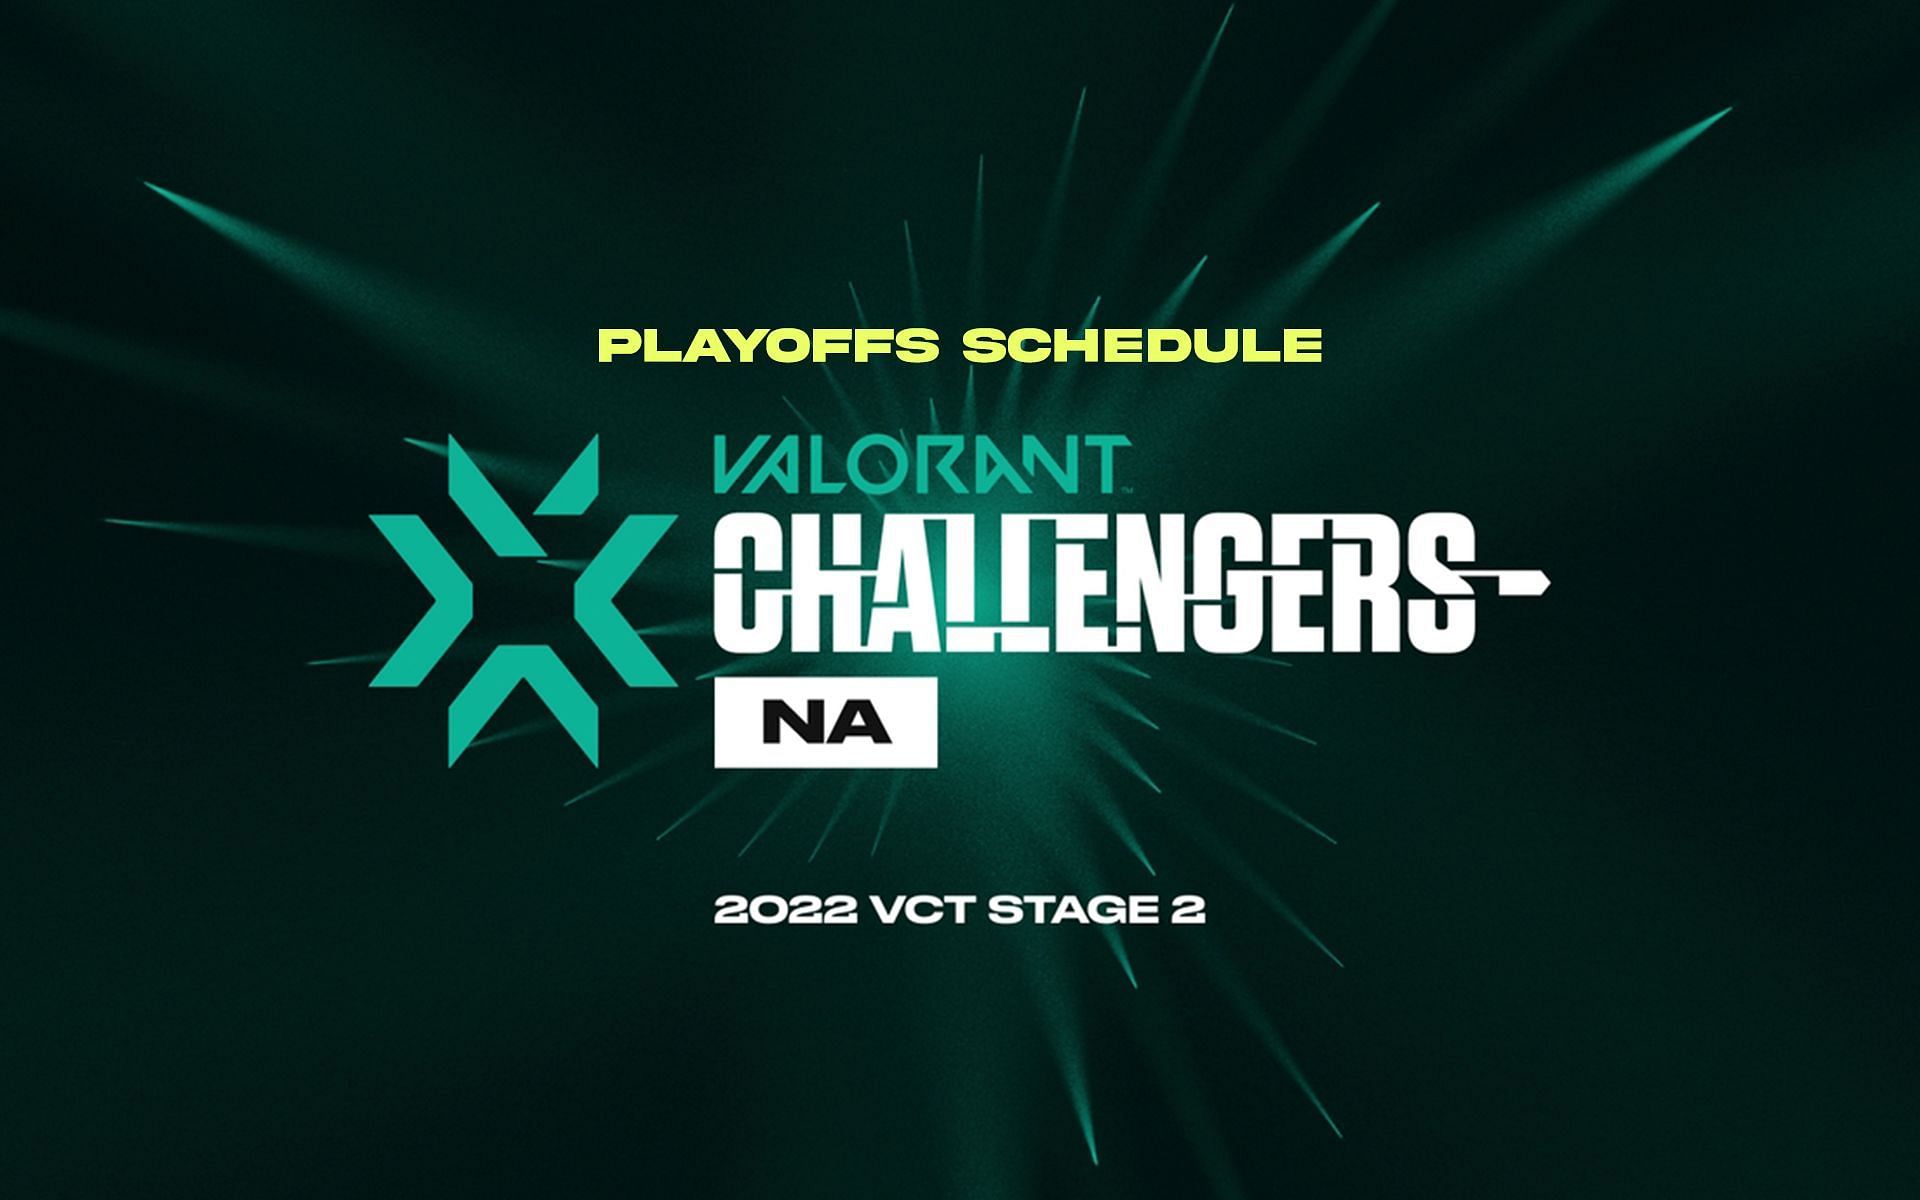 Previewing the VCT 2022 NA Stage 2 Challengers Playoffs (Image via Sportskeeda)